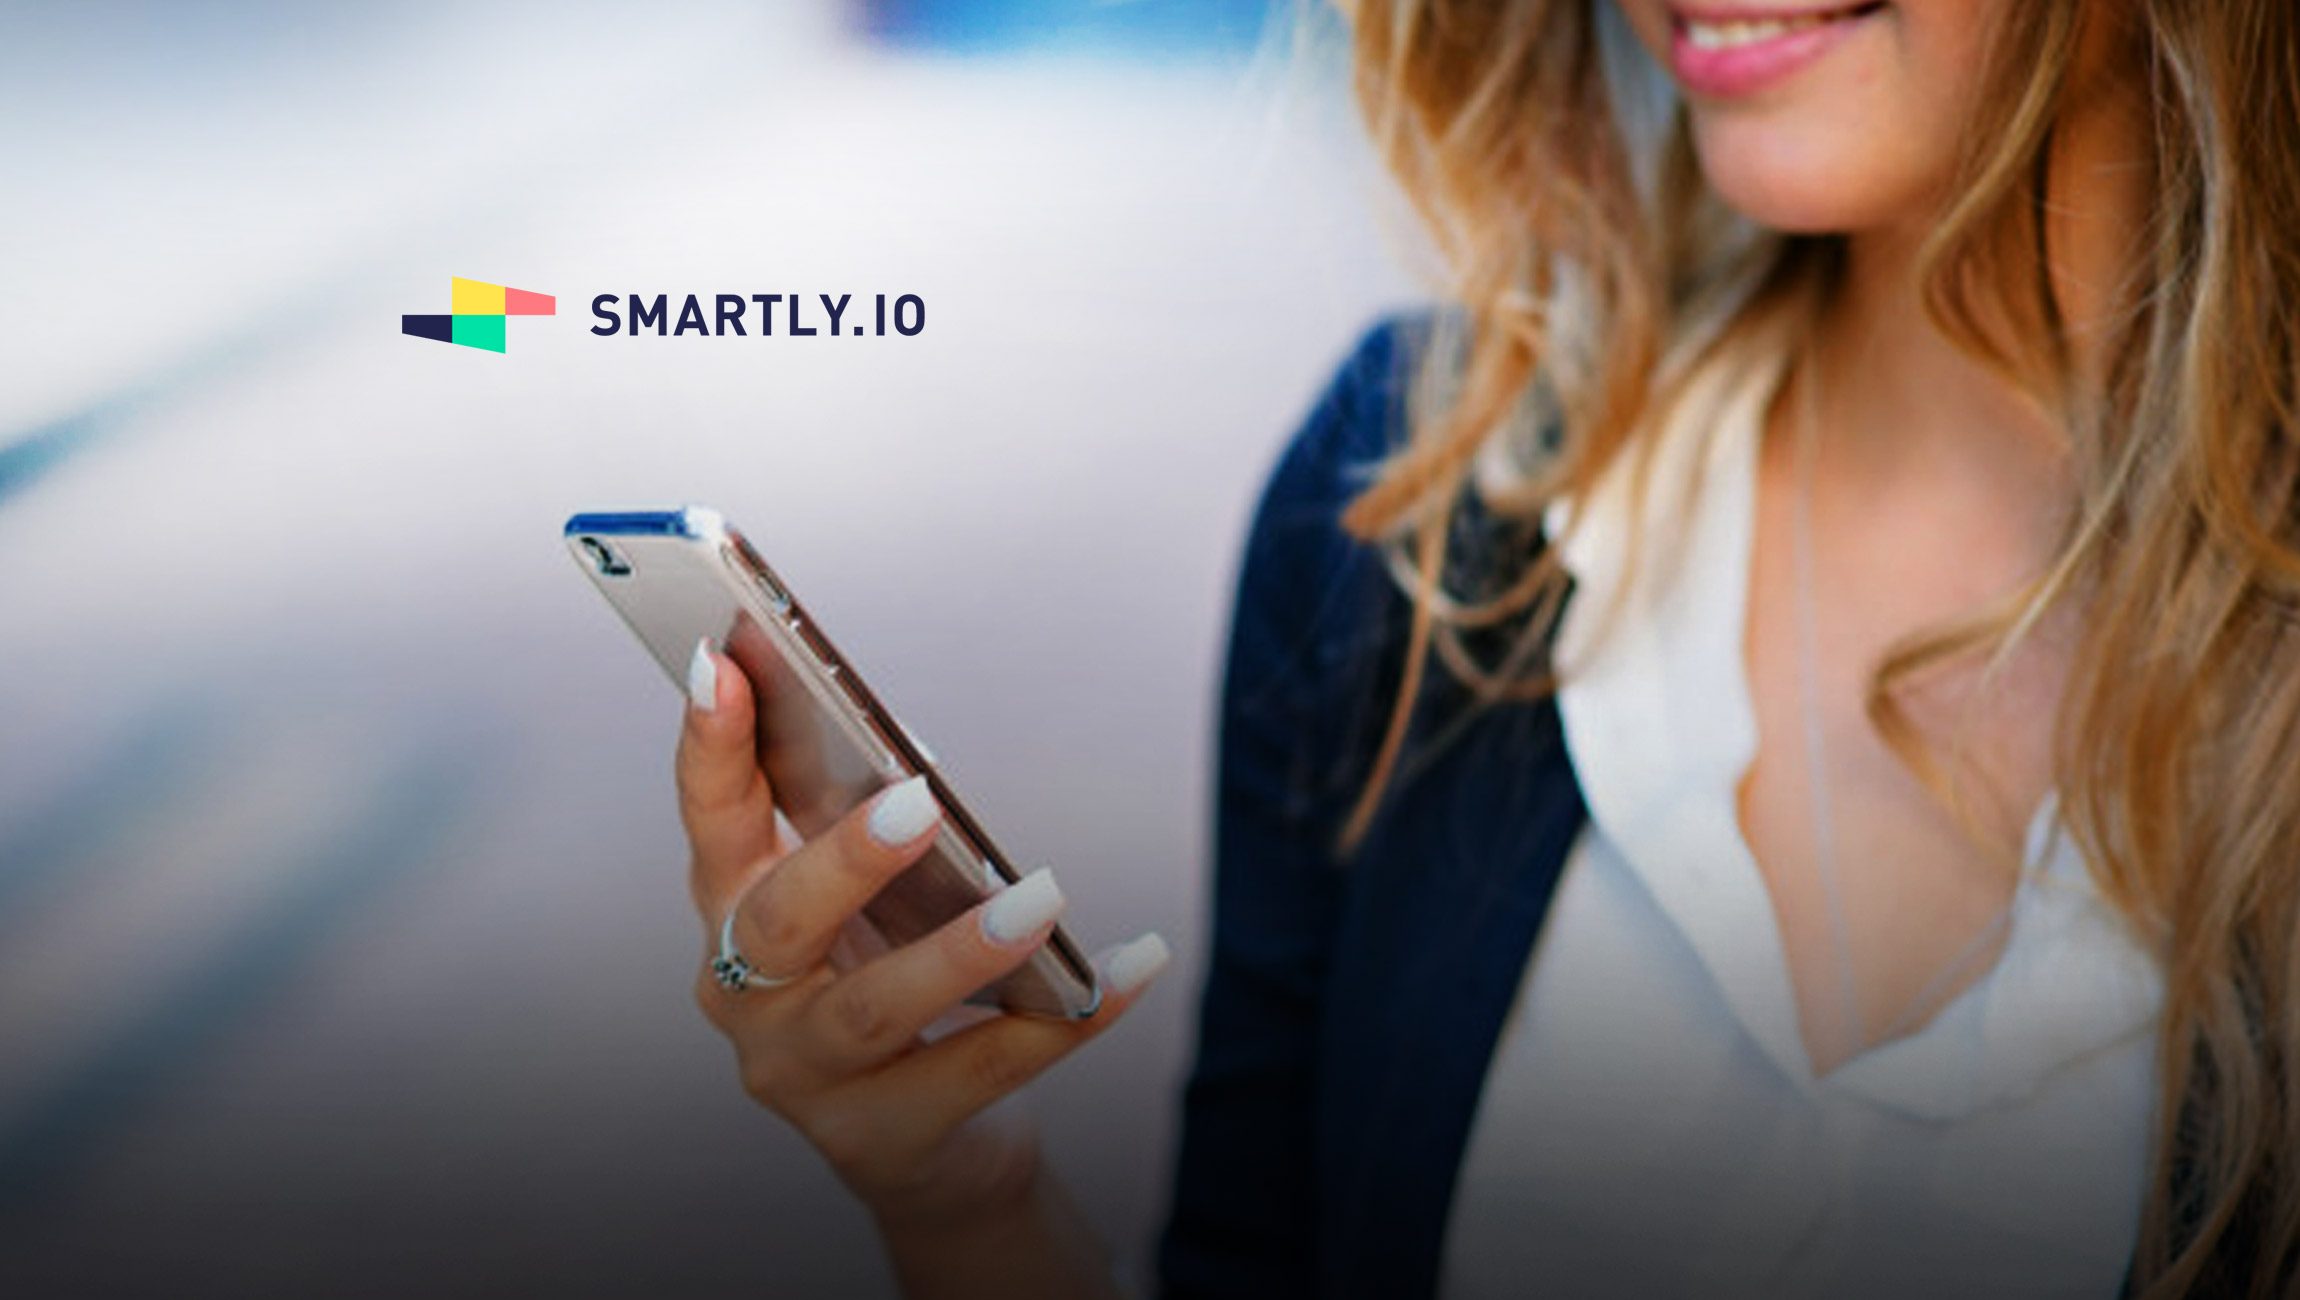 Smartly.Io Powers Digital Advertising Innovation and Automation on Pinterest